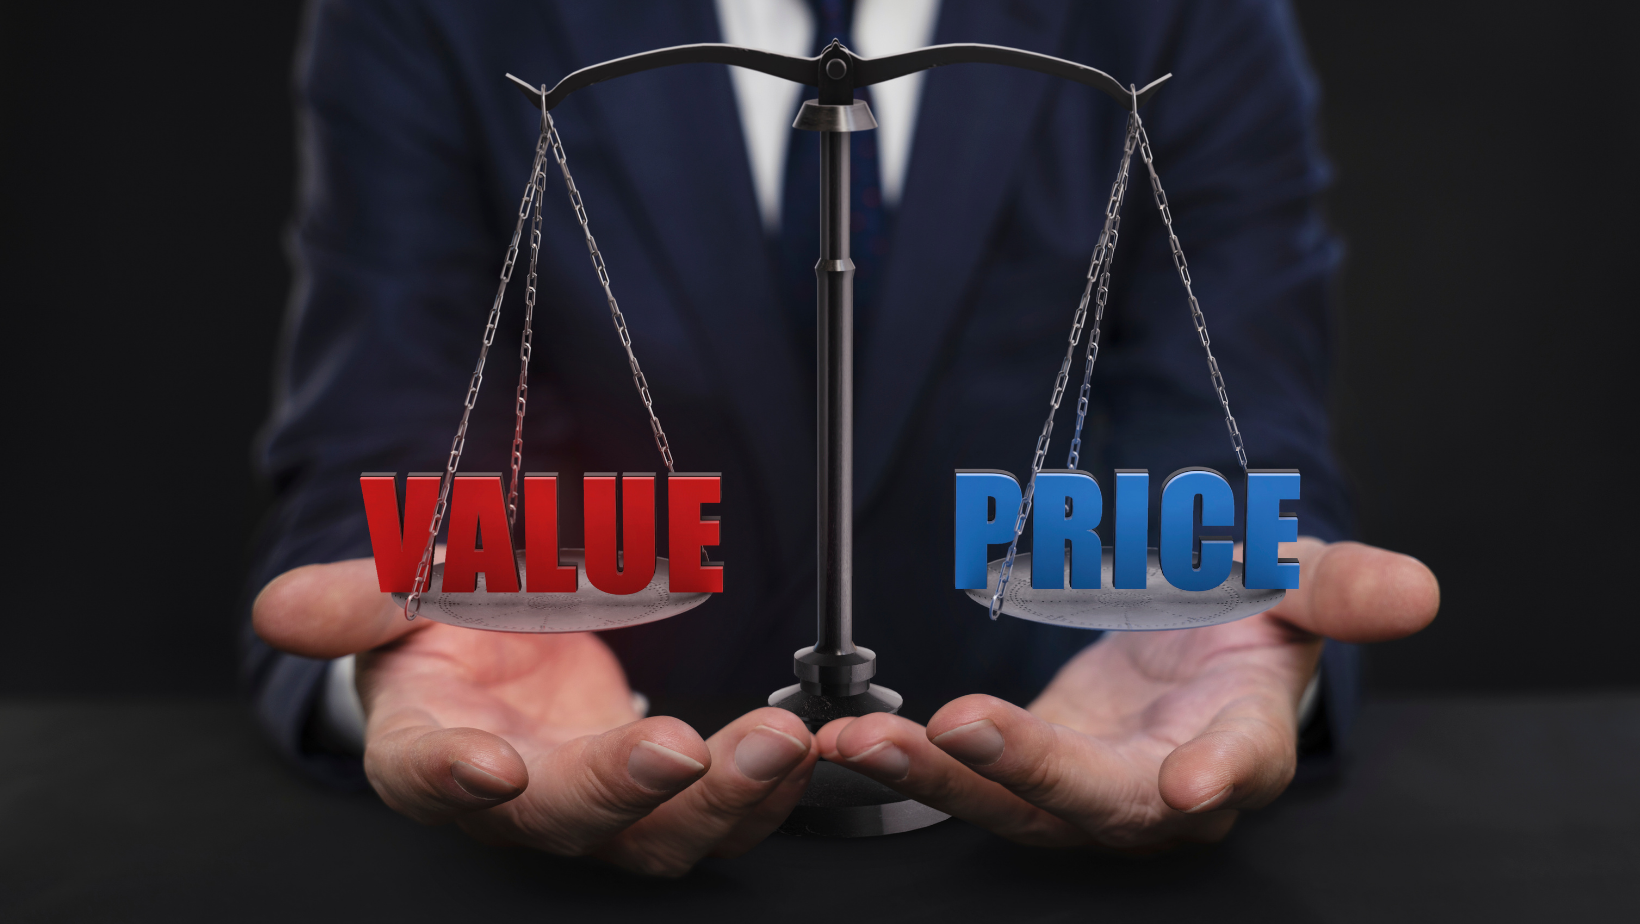 Scale of value and price